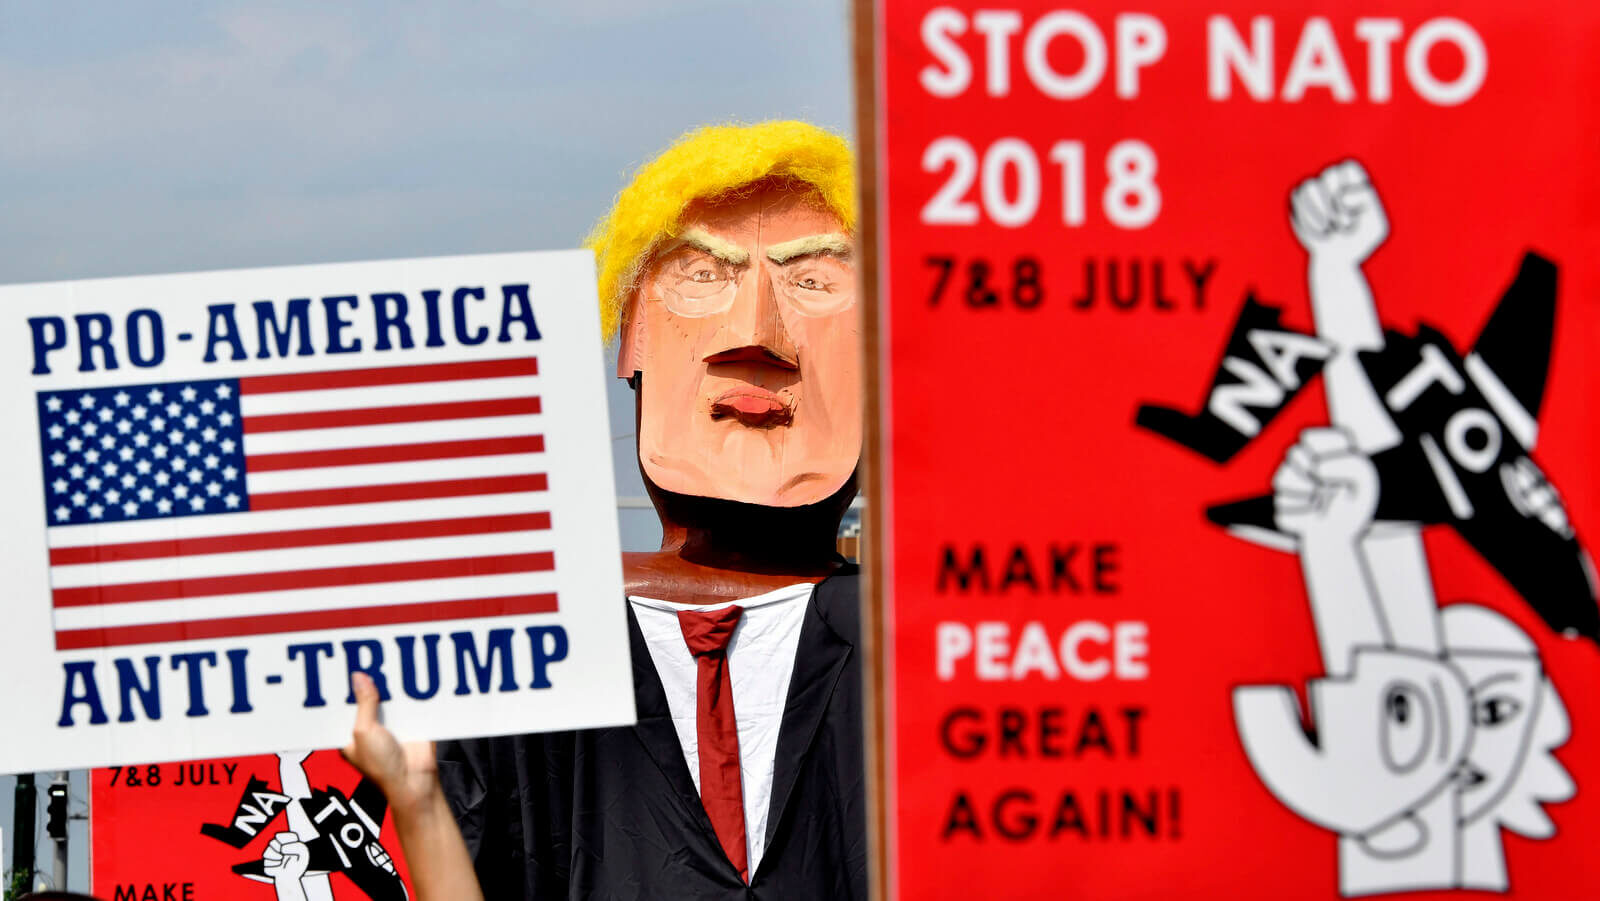 Protestors march next to giant puppet of U.S. President Donald Trump during a demonstration in Brussels, Saturday, July 7, 2018. Europeans are protesting U.S. President Donald Trump's appearance at a NATO summit, marching through Brussels to plead for less military spending and more public money for schools and clean energy. Geert Vanden Wijngaert | AP